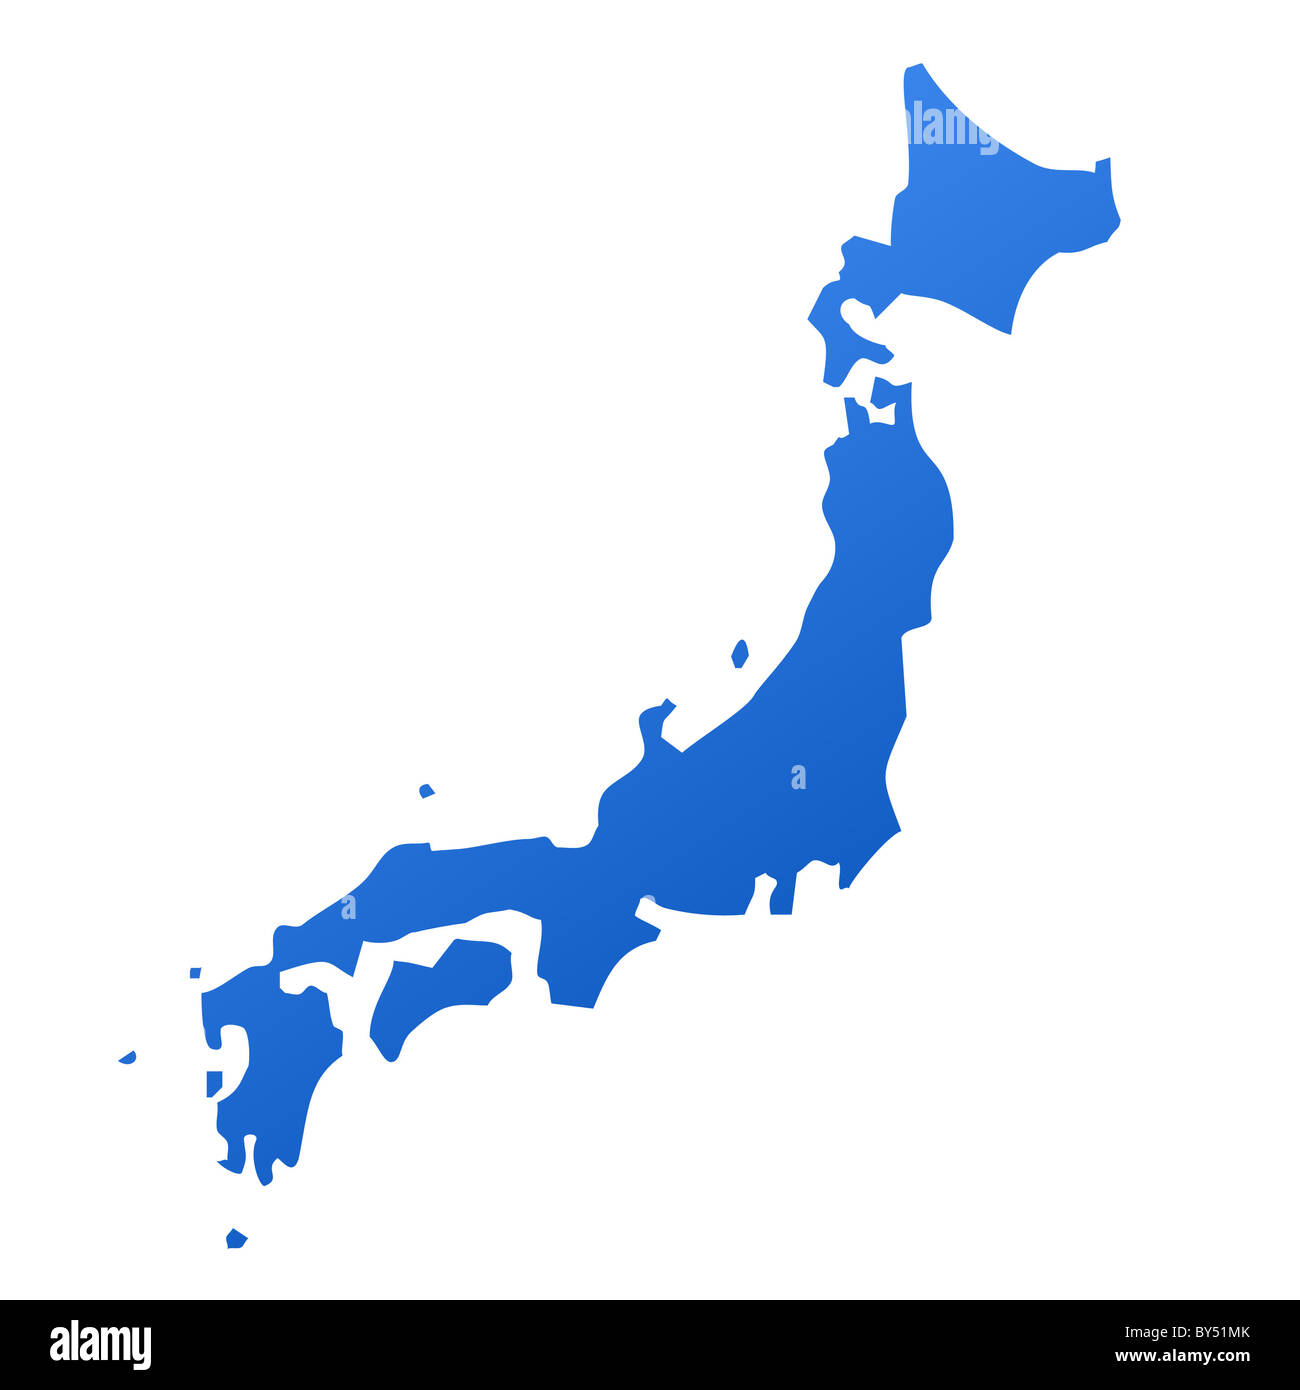 Blue map of Japan, isolated on white background with clipping path. Stock Photo